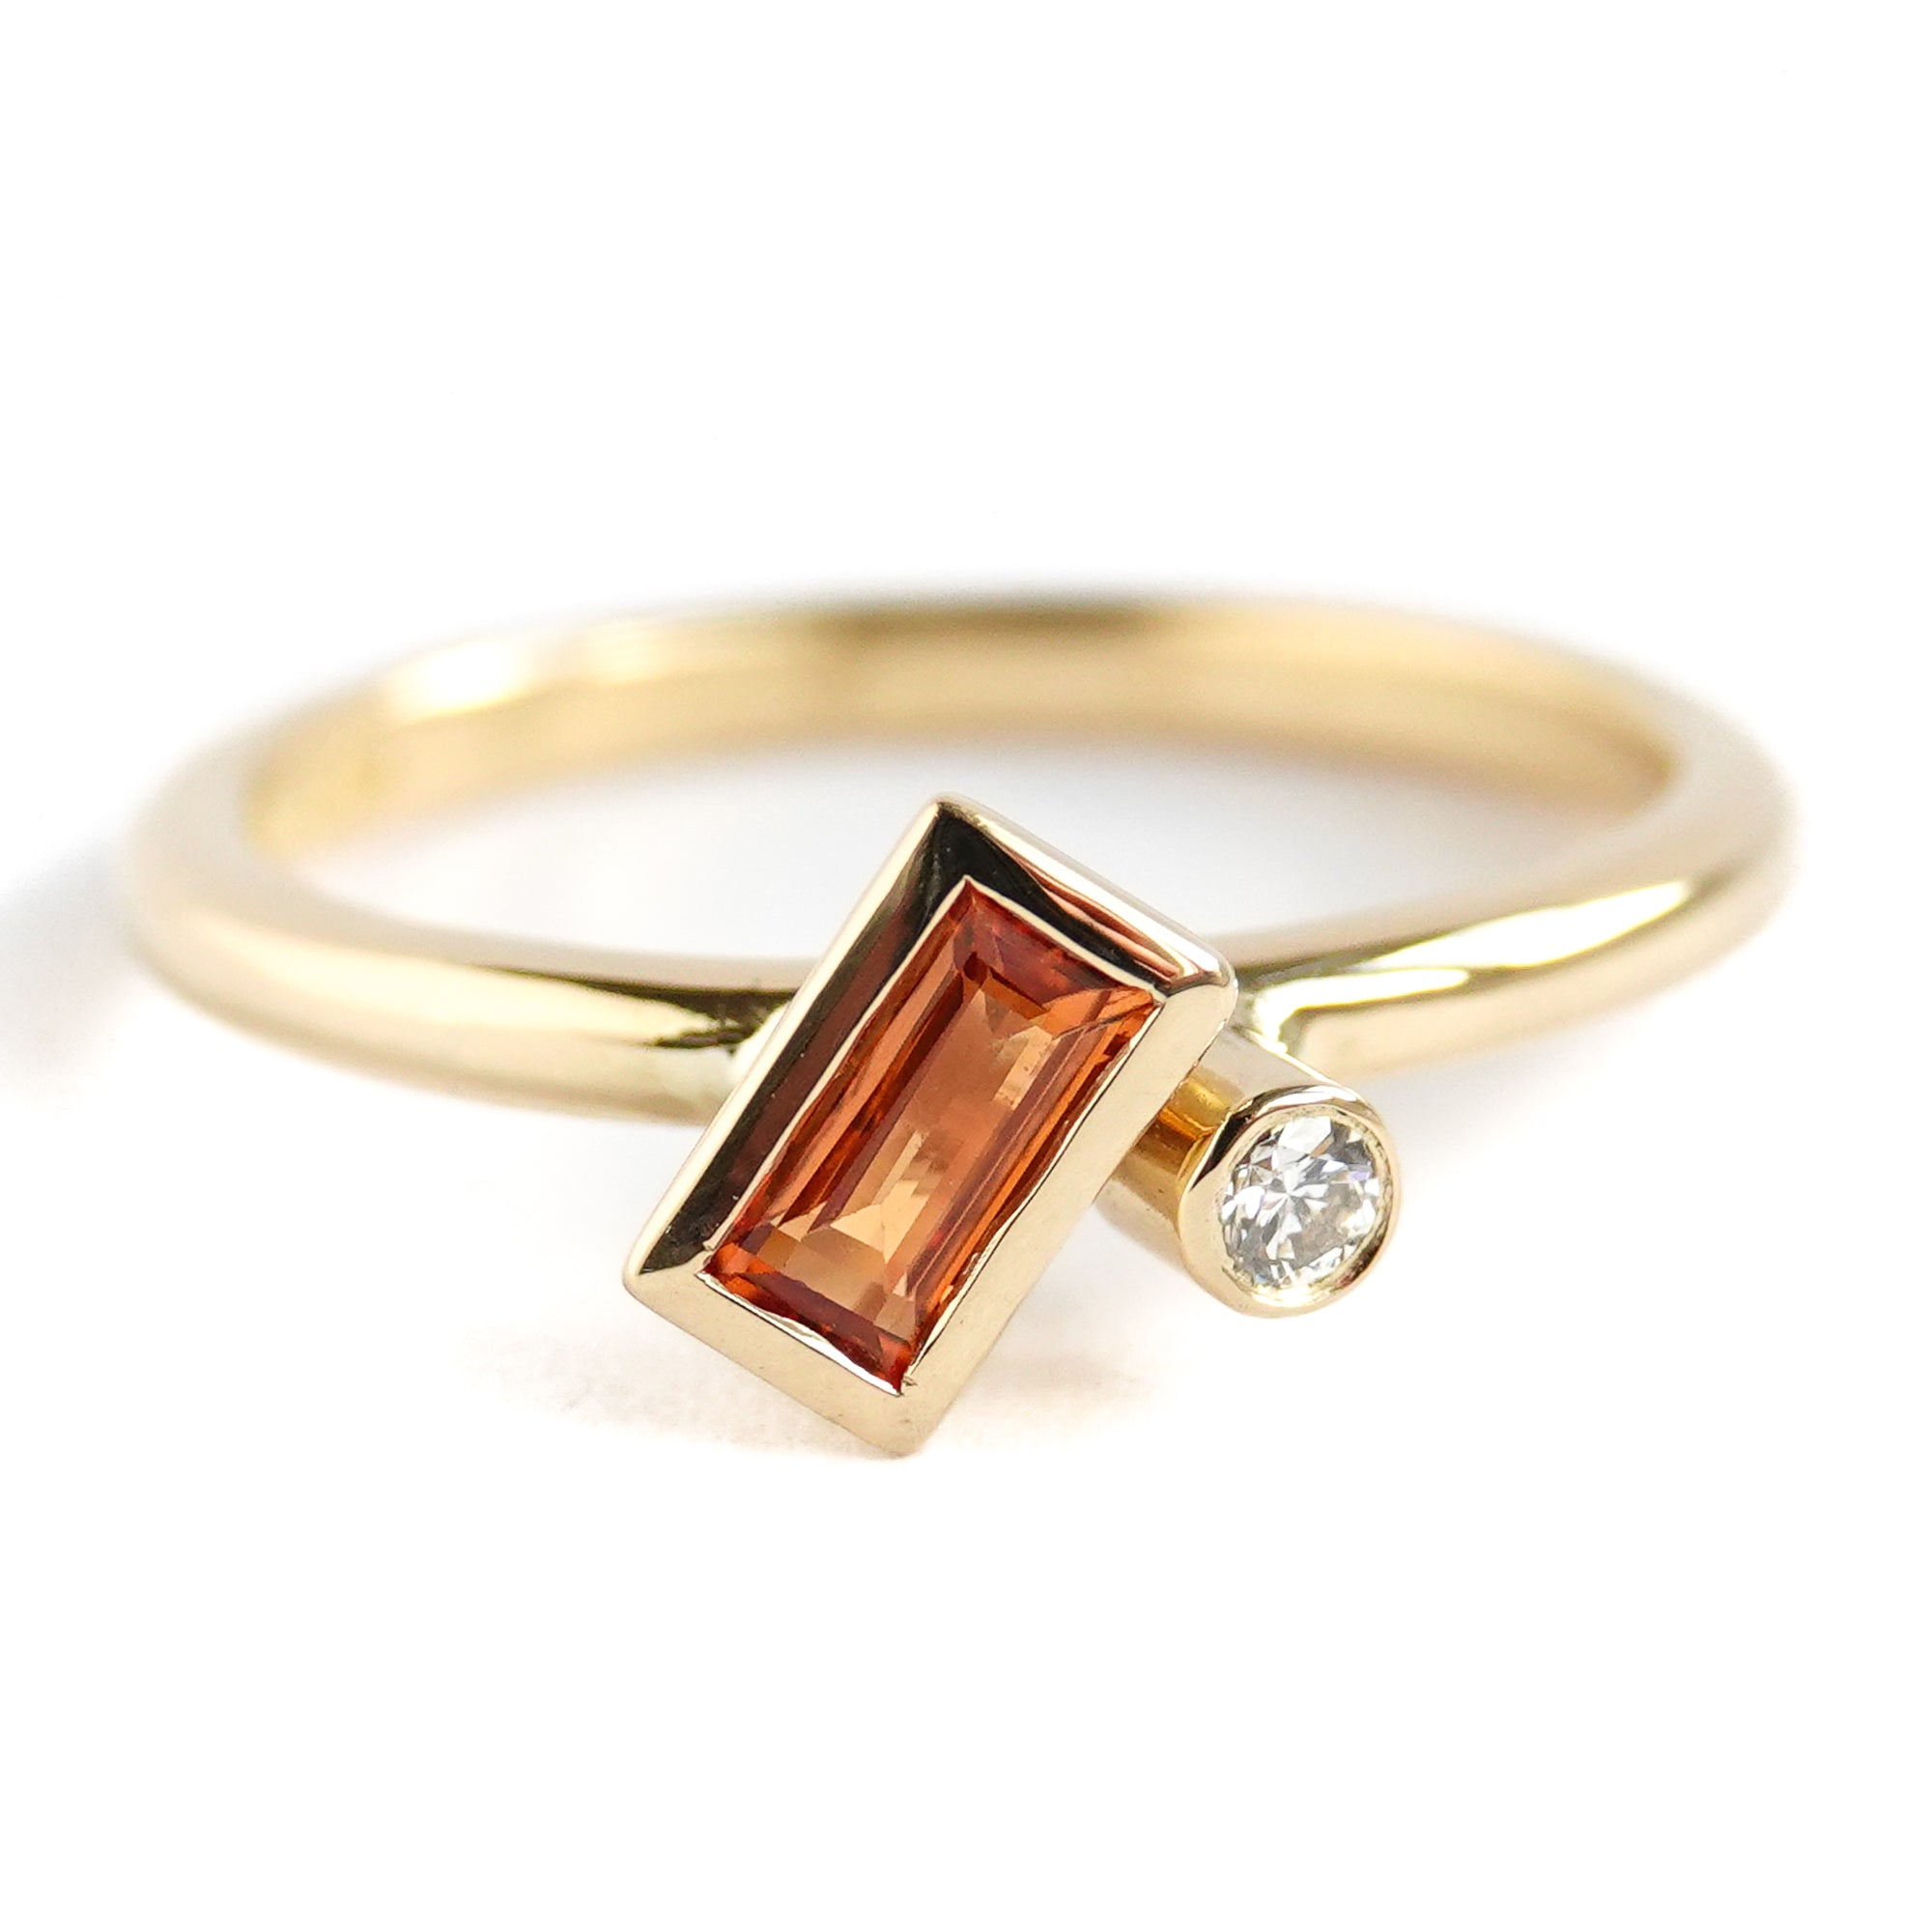 A bespoke orange sapphire and diamond 18ct gold ring. Contemporary and unique.